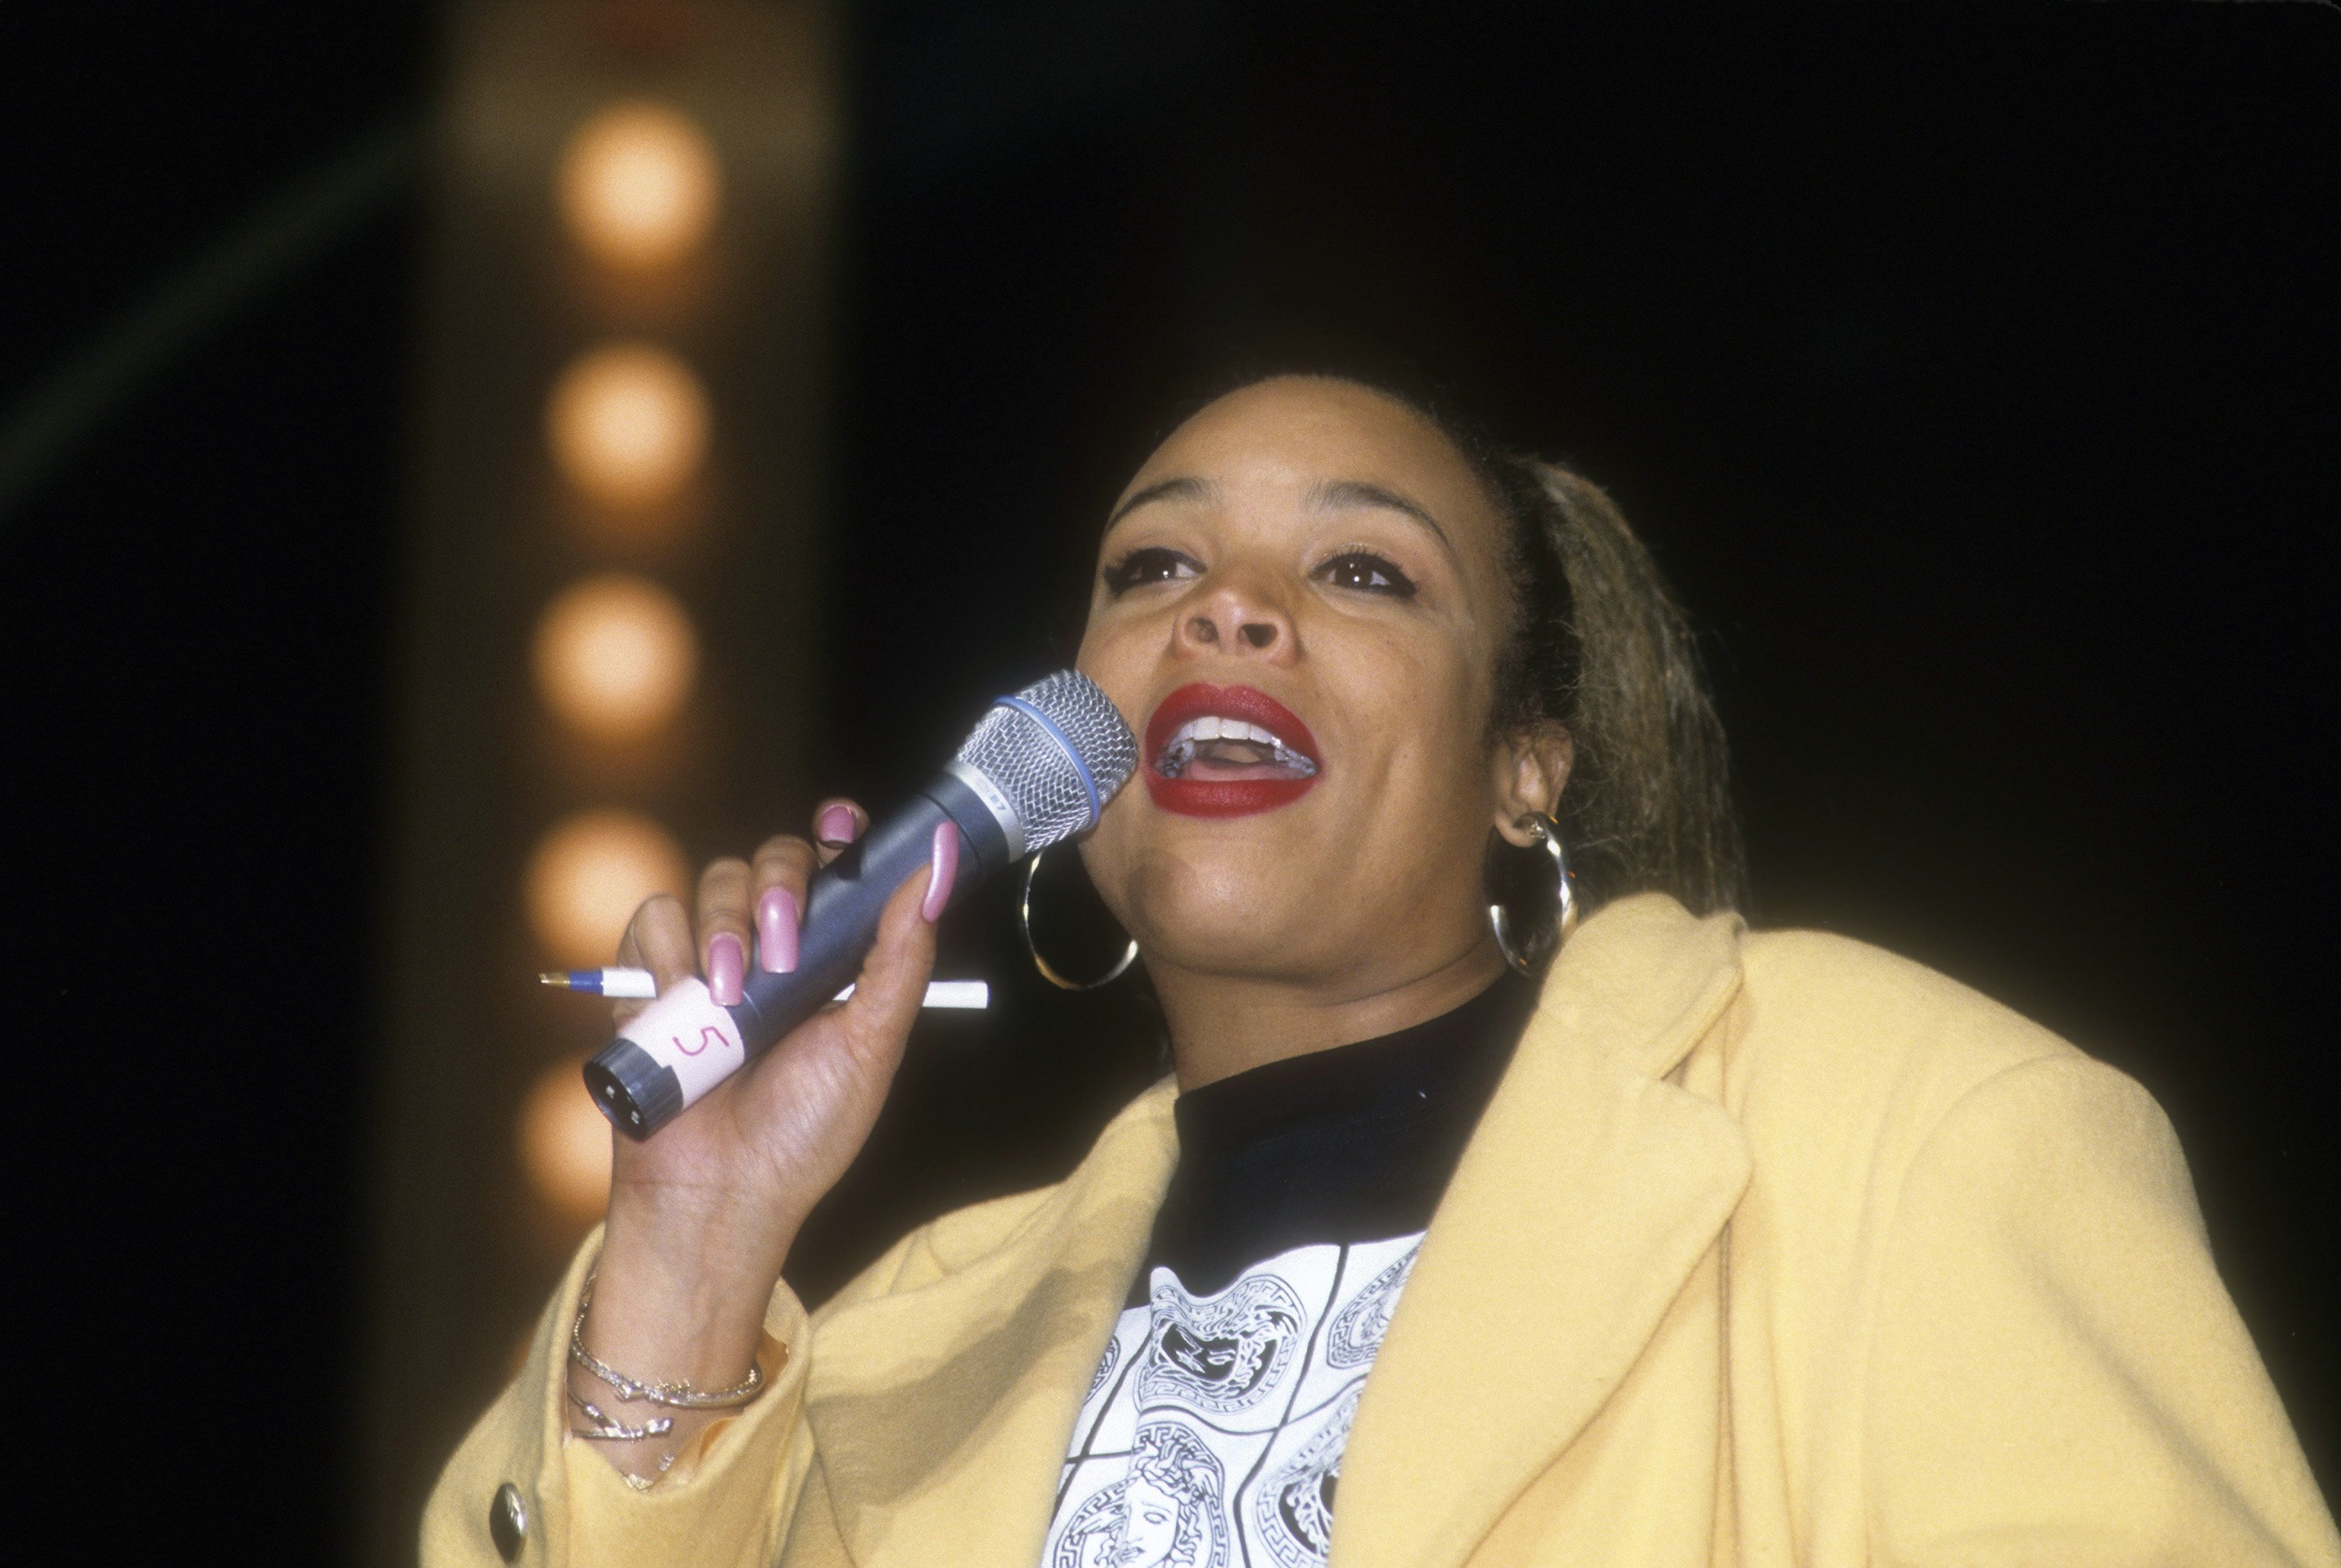 Wendy Williams hosting a show at The Apollo Theater in New York City in 1996 | Source: Getty Images